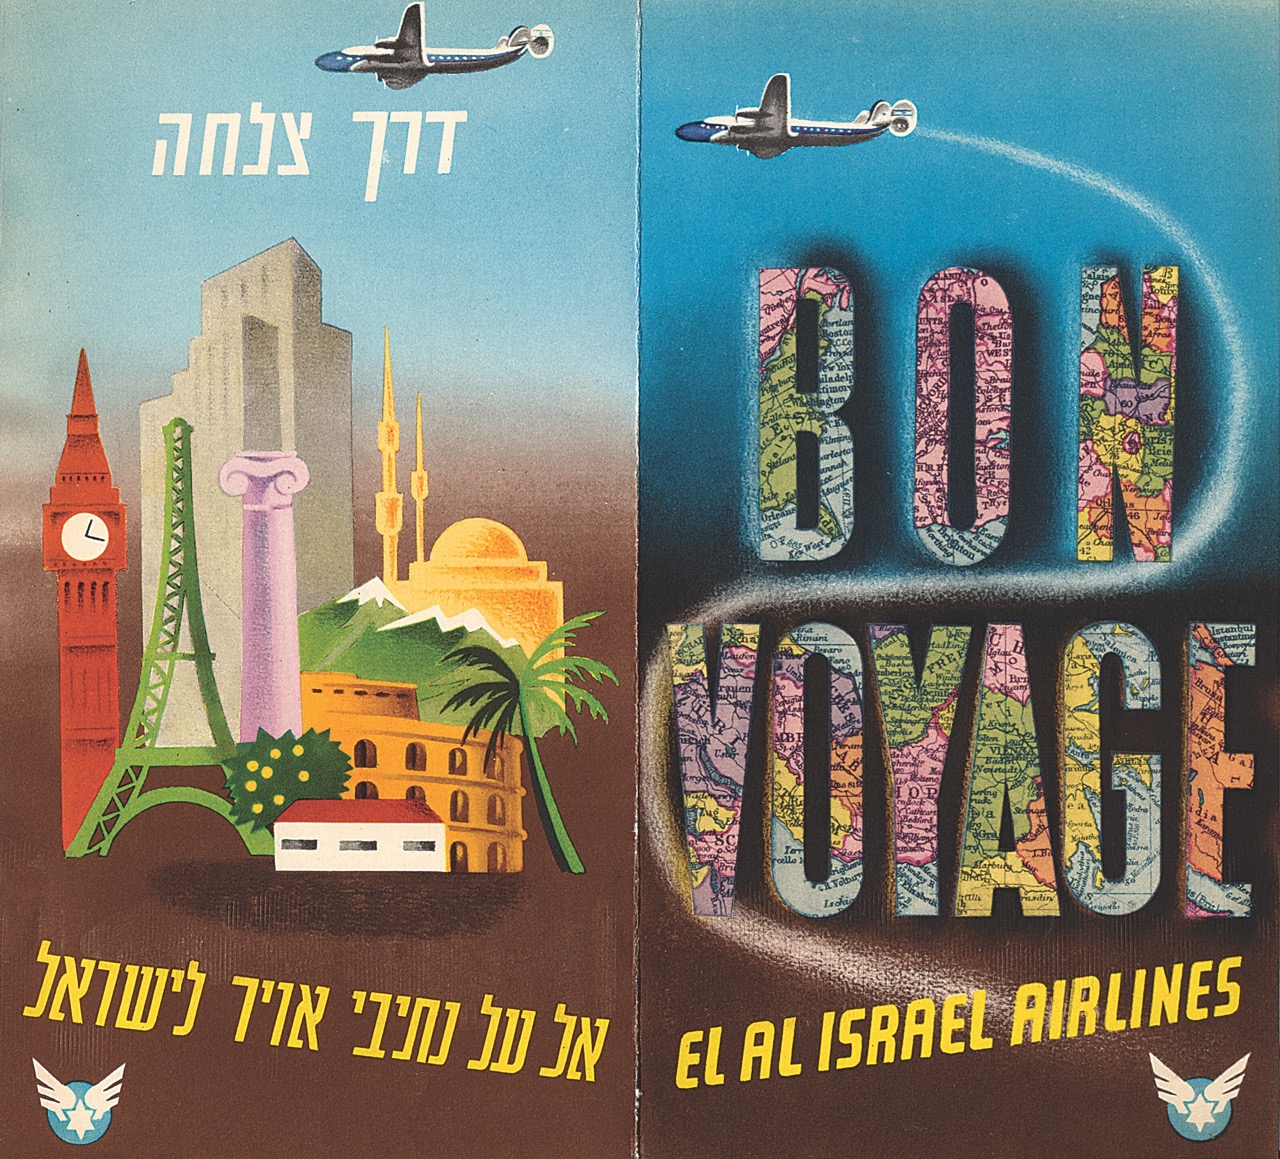 Symbols of EL AL's destinations and a hearty Bon Voyage appear on the outside of a 1952 Constellation-era ticket jacket, designed by Israeli graphic artist G Hamori. (MG collection)